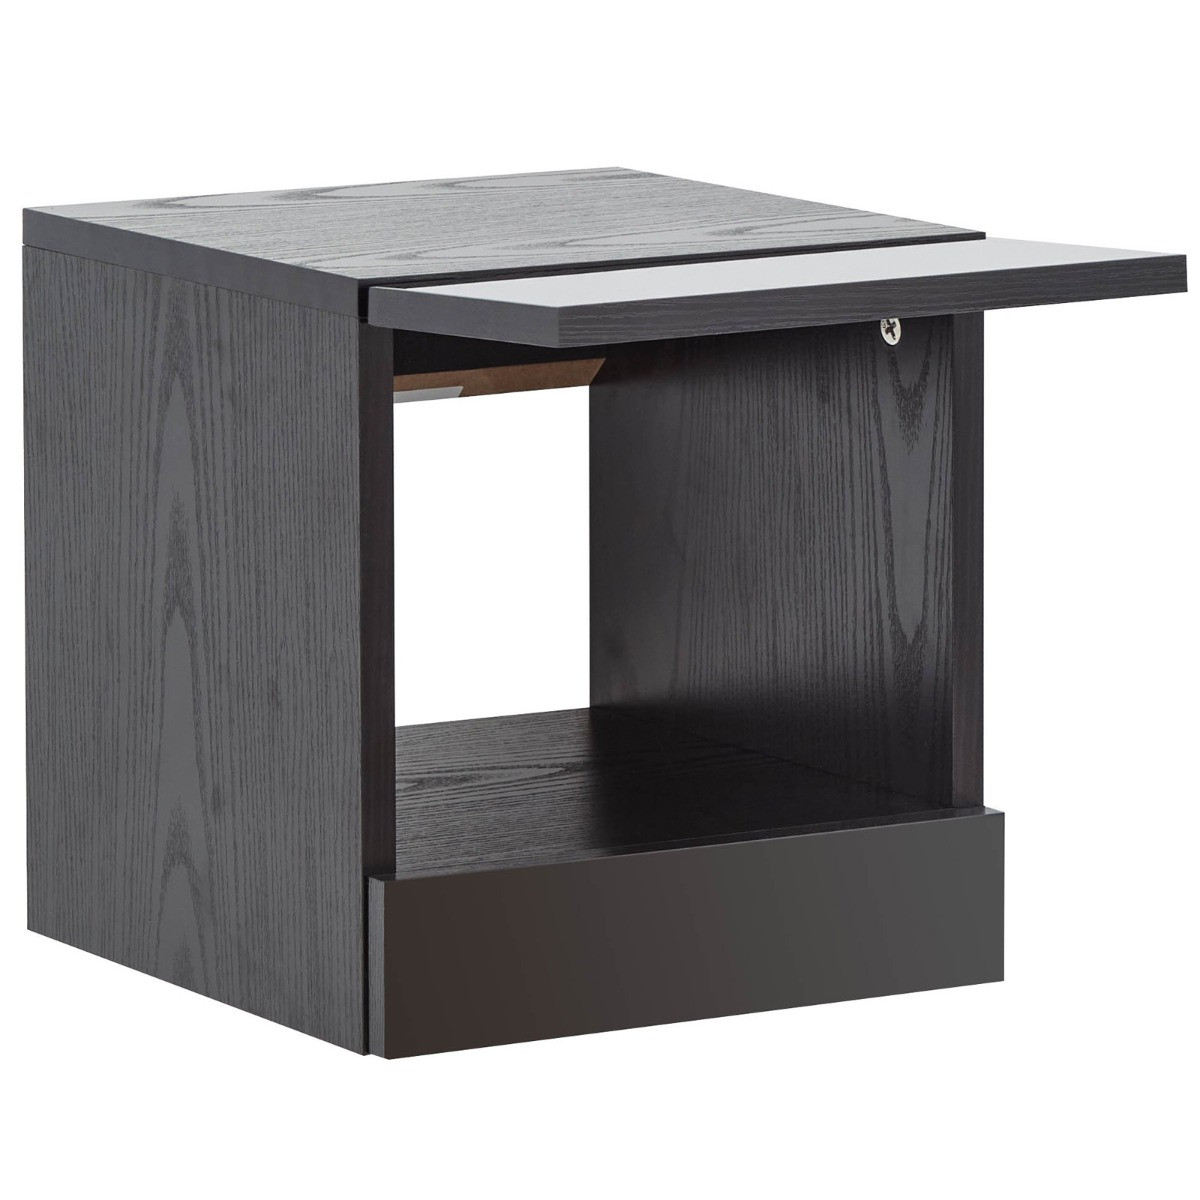 Galicia Pair Of Wall Hanging Bedside Tables - Black>